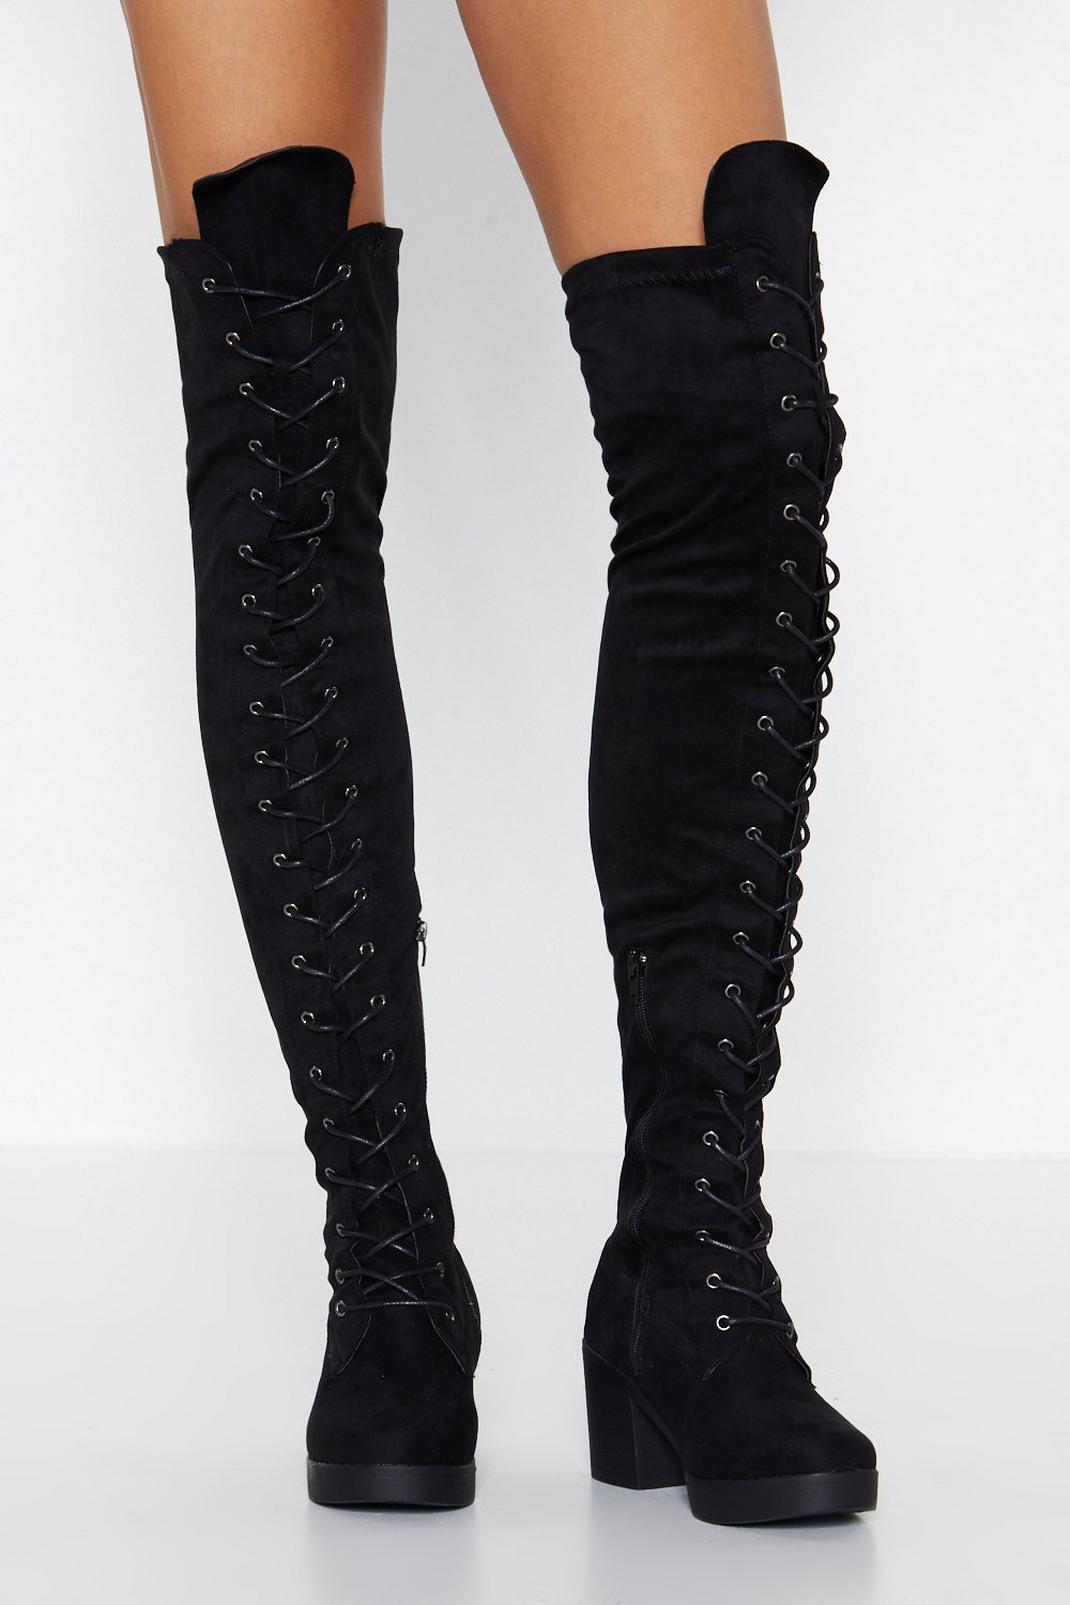 Lace Up Over the Knee Boots | Nasty Gal